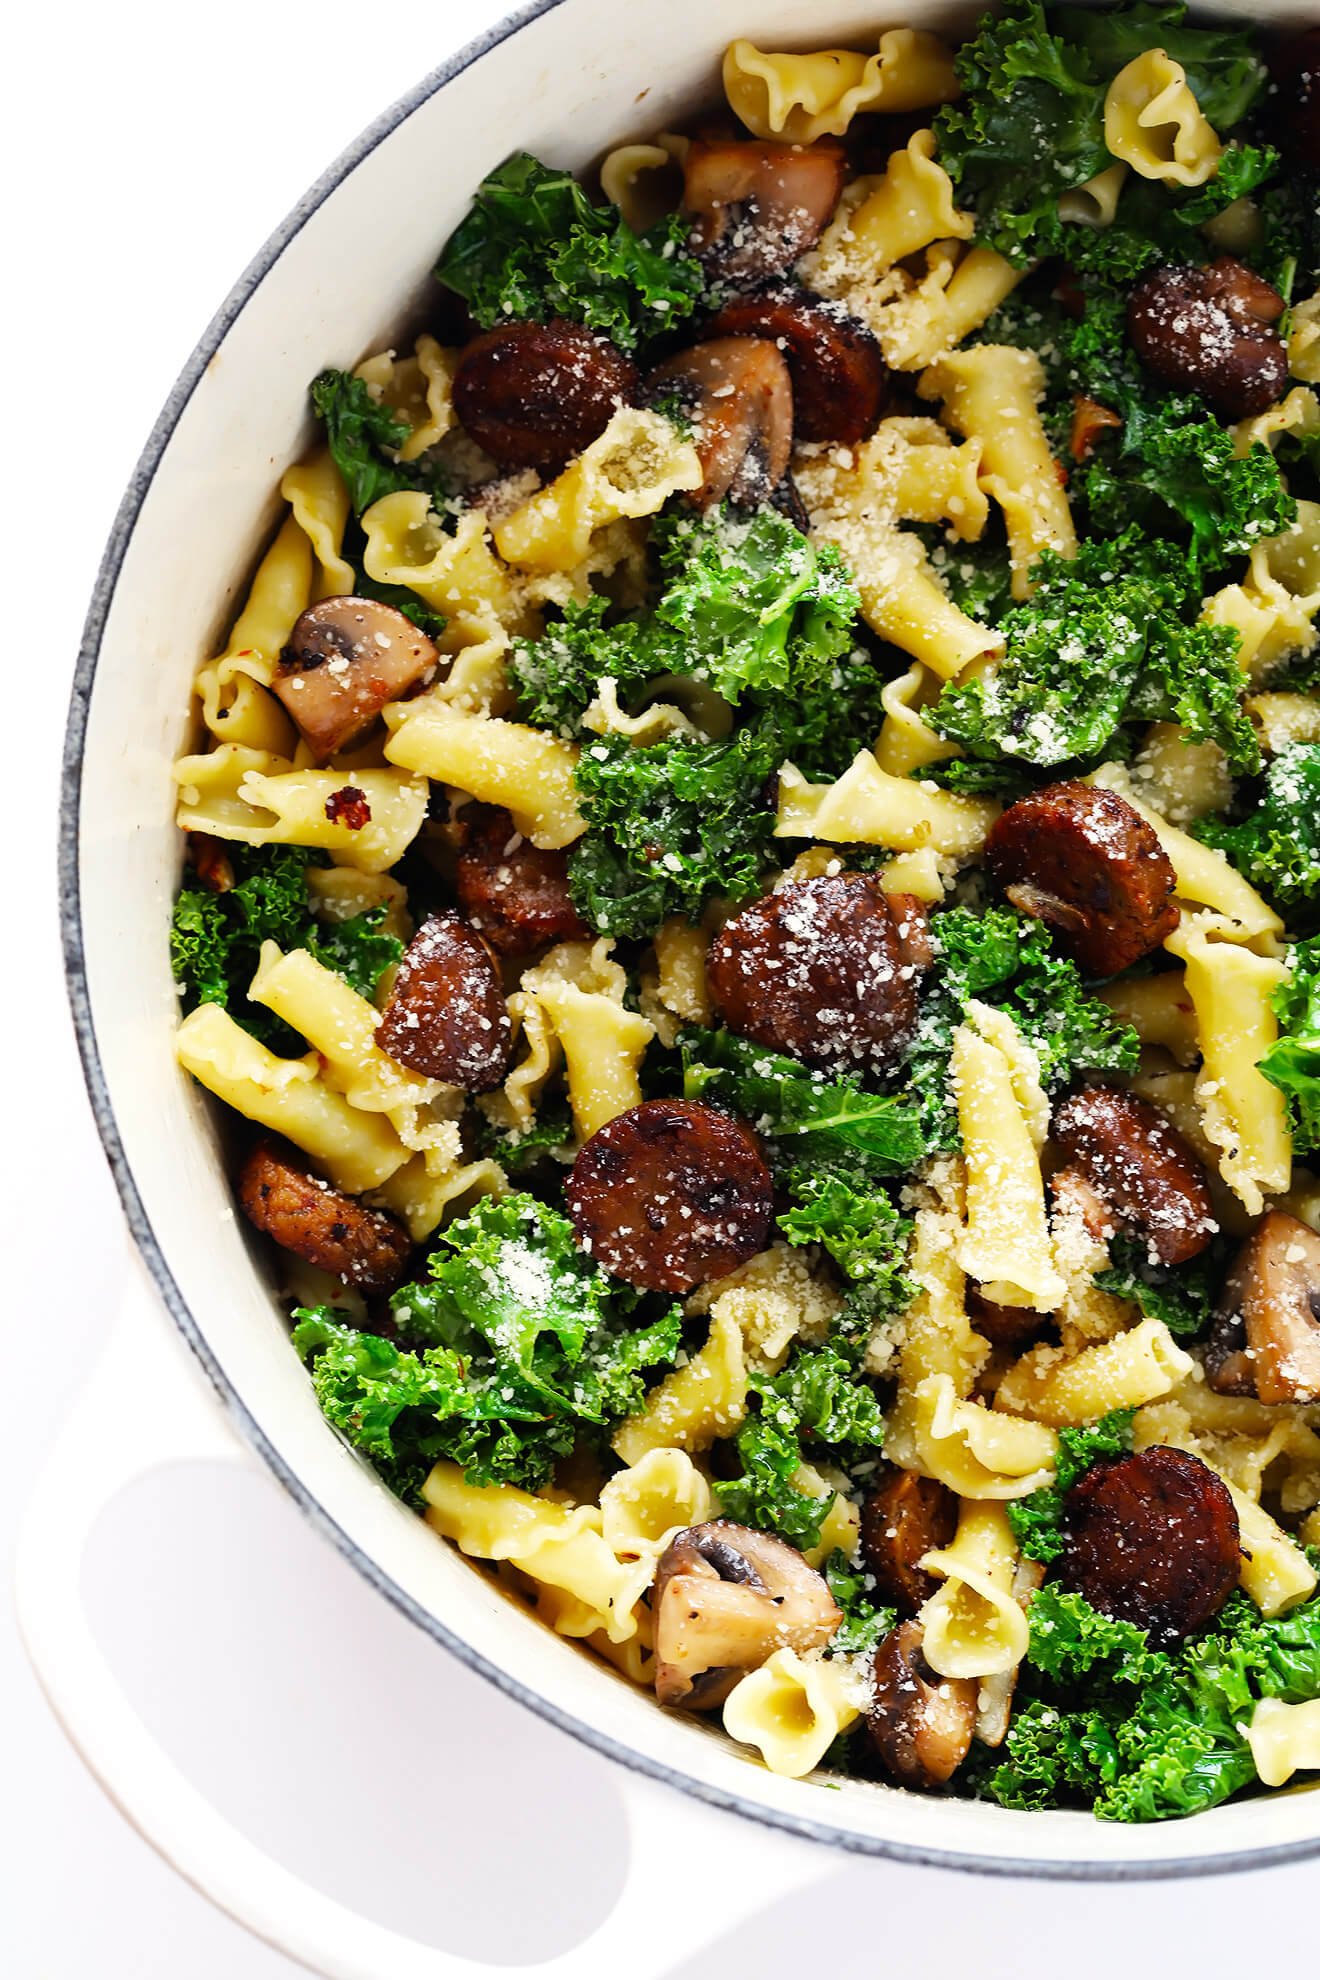 Pasta with Italian Sausage, Kale and Mushrooms - Gimme Some Oven